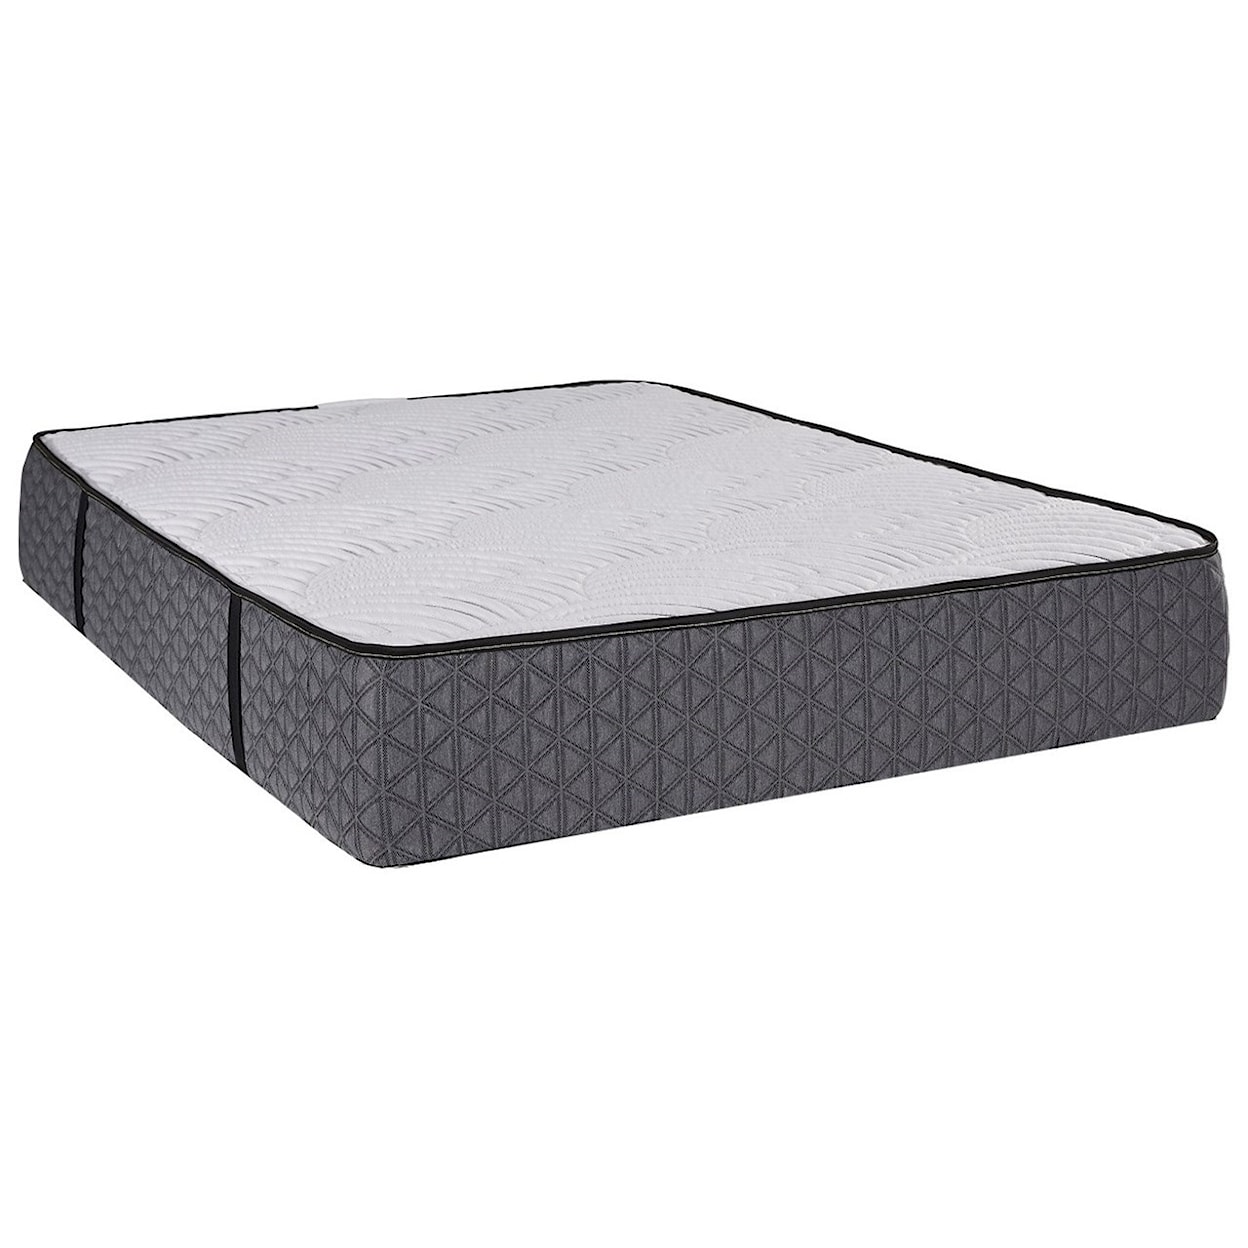 Restonic Aphrodite Firm Twin Pocketed Coil Mattress